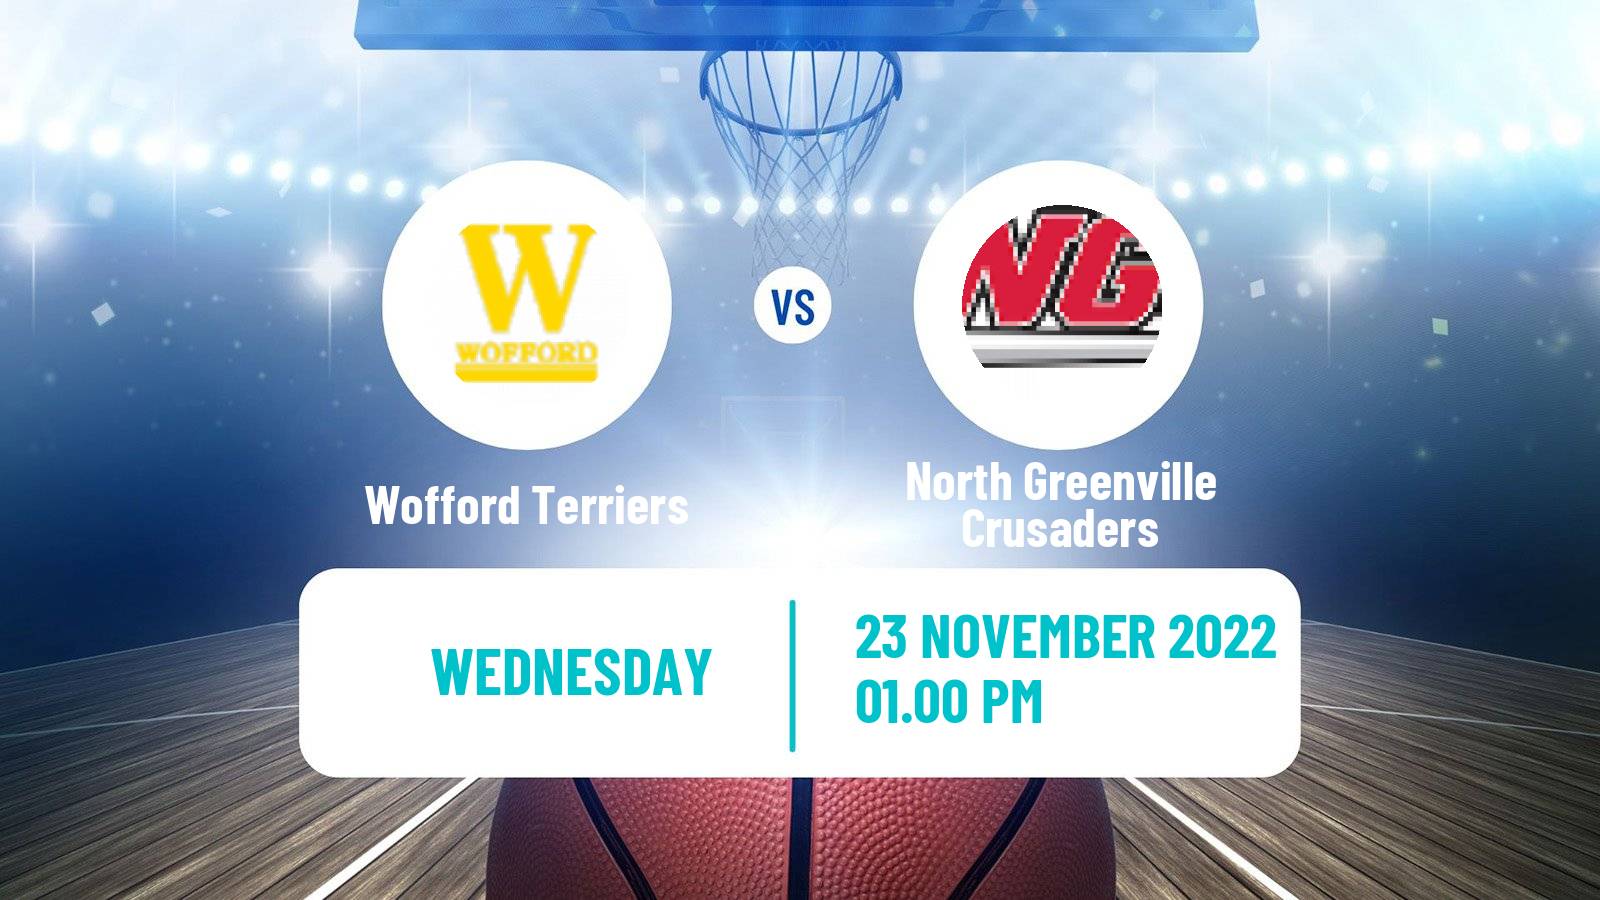 Basketball NCAA College Basketball Wofford Terriers - North Greenville Crusaders